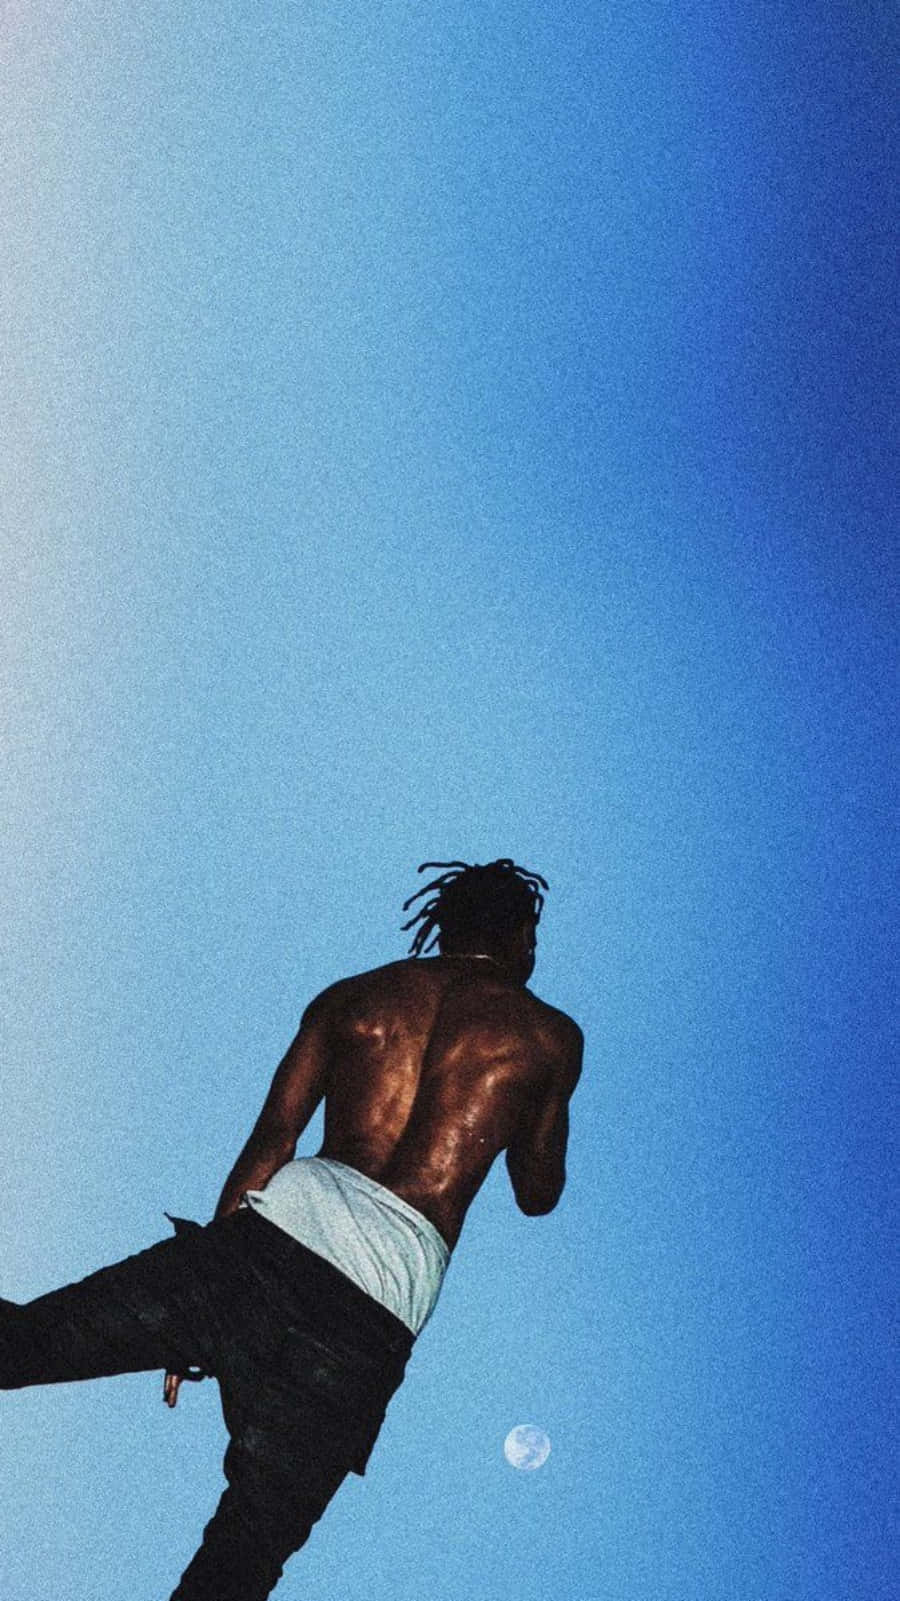 Join the Astroworld - Get your Travis Scott Iphone Wallpaper